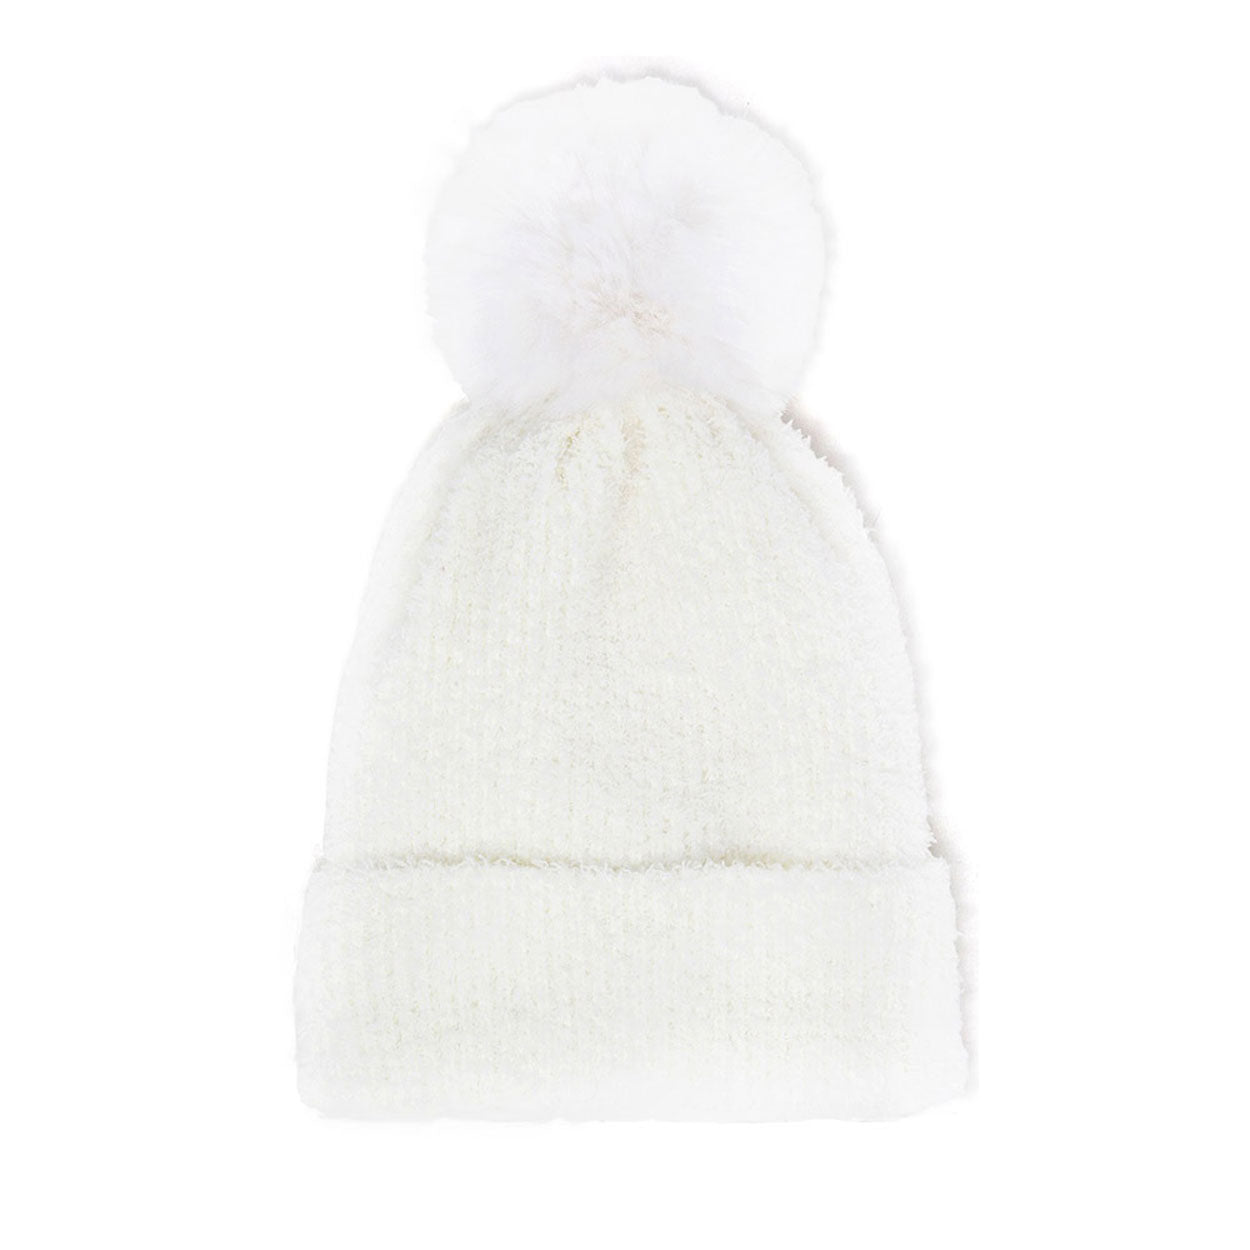 White Solid Pom Pom Soft Fluffy Beanie Hat. Before running out the door into the cool air, you’ll want to reach for these toasty beanie hats to keep your hands incredibly warm. Accessorize the fun way with these beanie hats, it's the autumnal touch you need to finish your outfit in style. Awesome winter gift accessory!